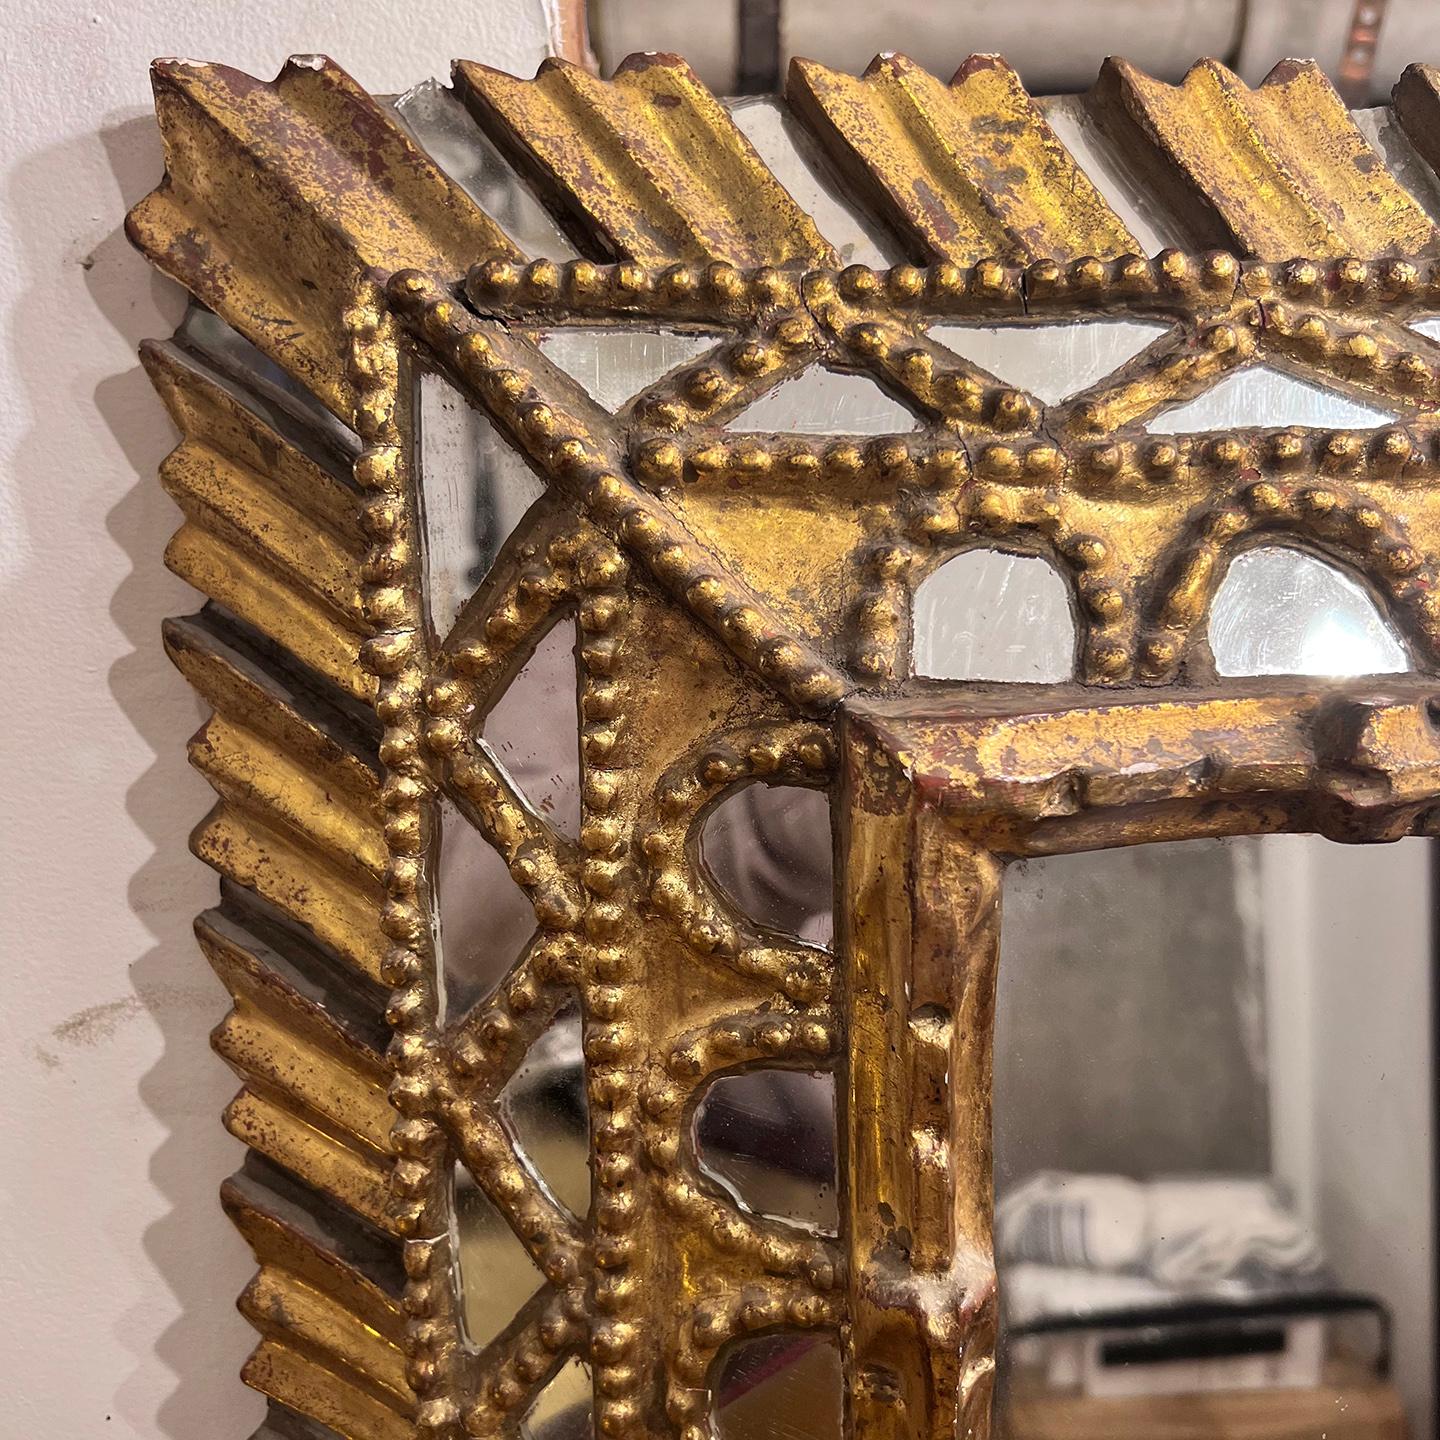 Late 19th Century Spanish colonial gilt wood mirror with mirror insets.

Measurements:
Height: 55.5